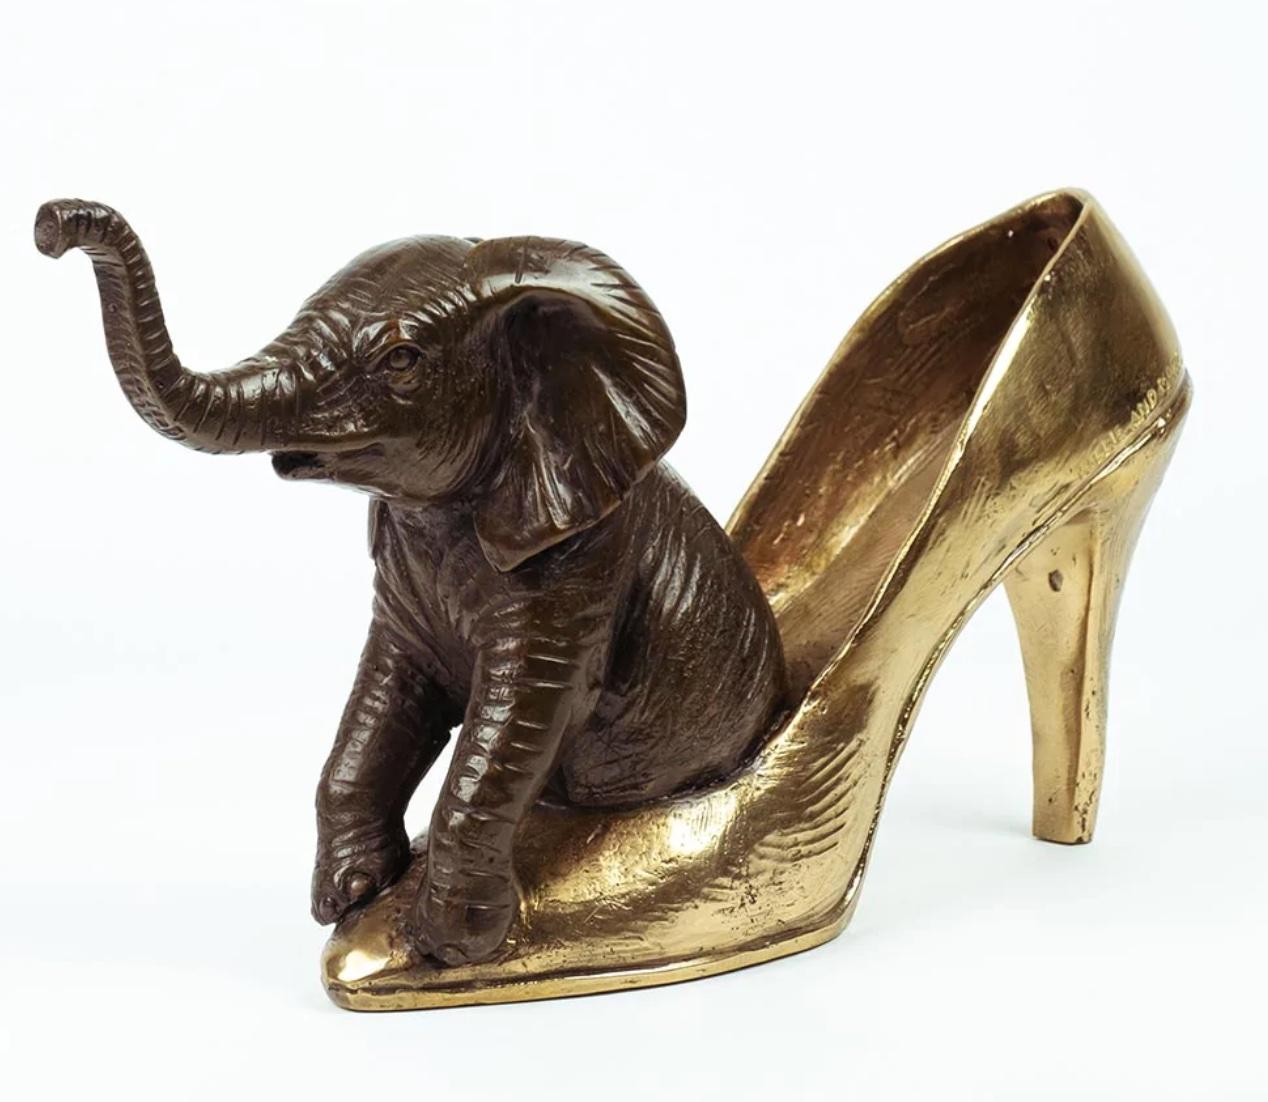 Authentic Bronze Walk With The Elephant with Gold Patina by Gillie and Marc - Sculpture by Gillie and Marc Schattner